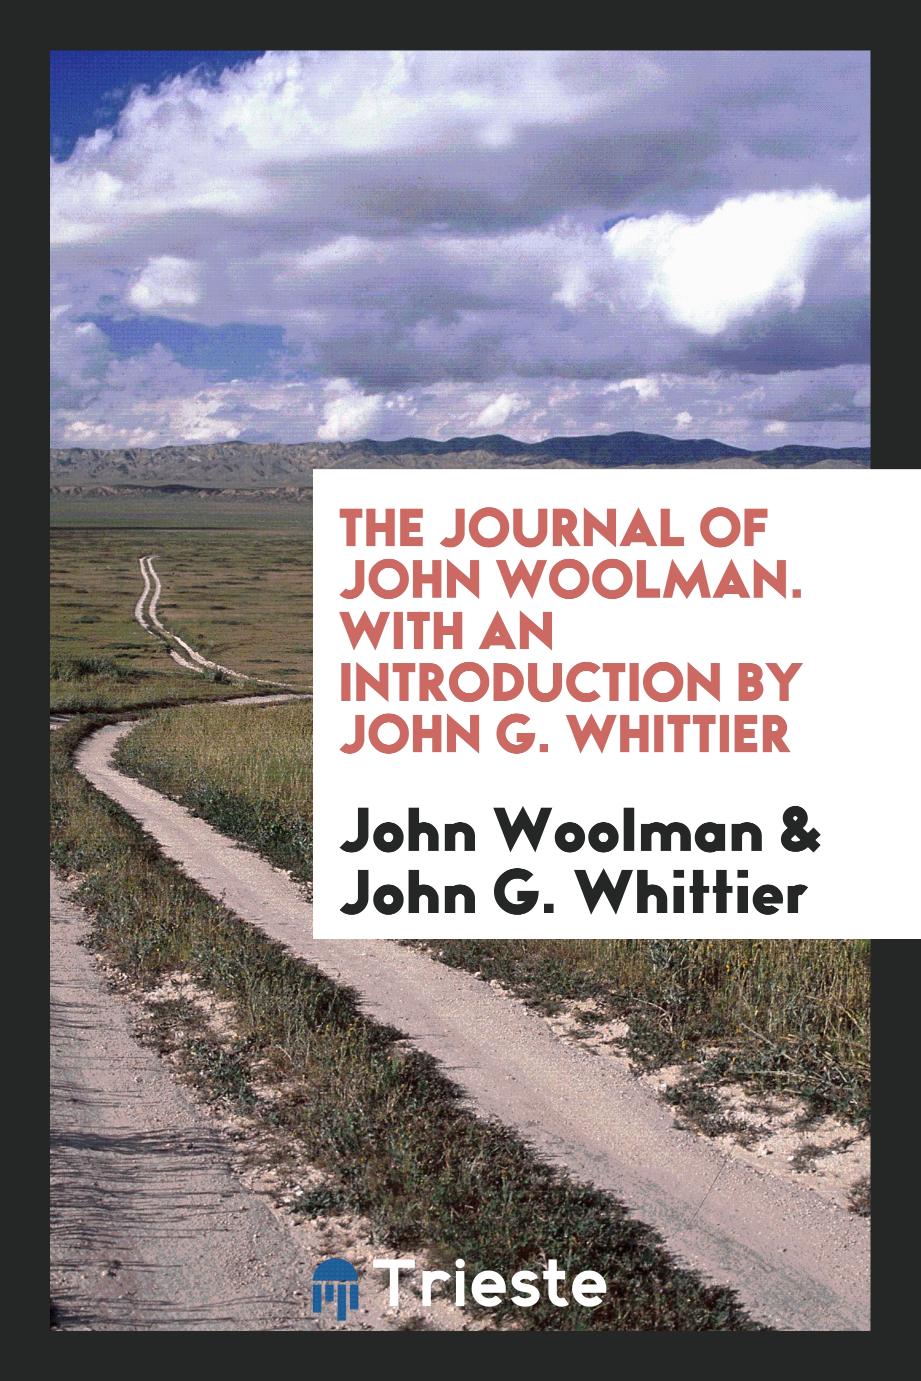 The Journal of John Woolman. With an Introduction by John G. Whittier